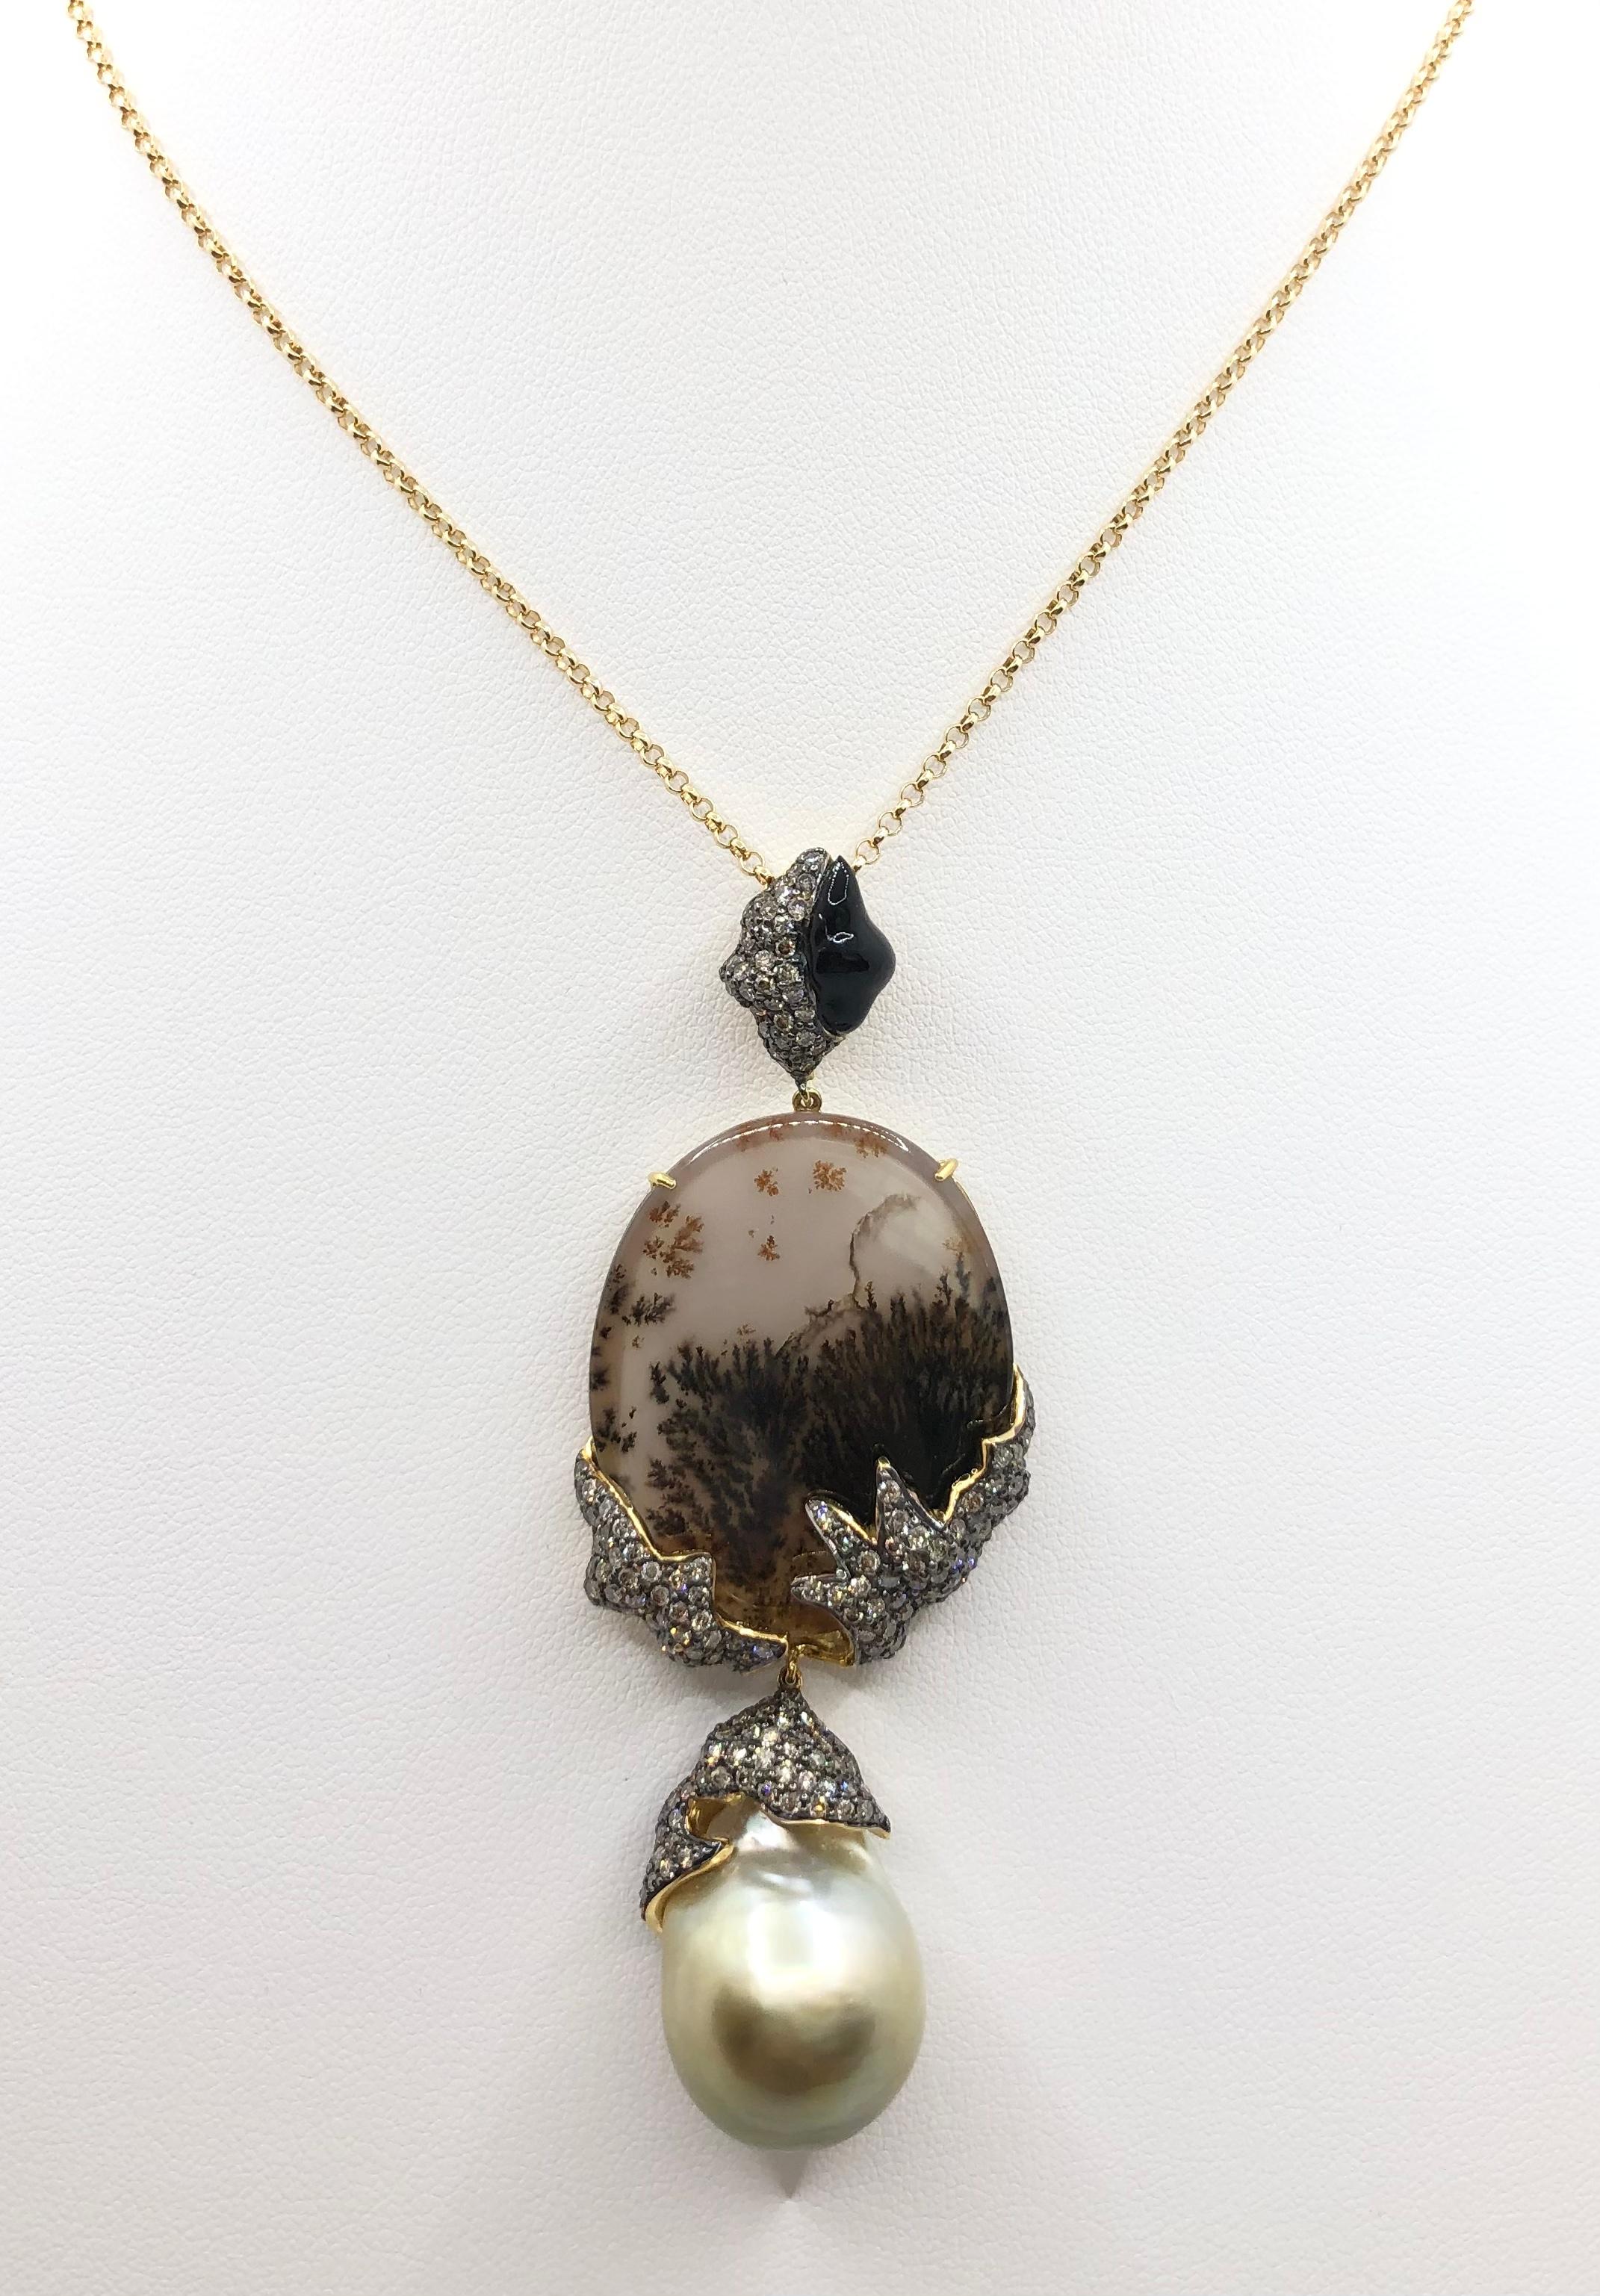 South Sea Pearl, Quartz, Brown Diamond with Black Spinel Necklace in 18K Gold For Sale 3